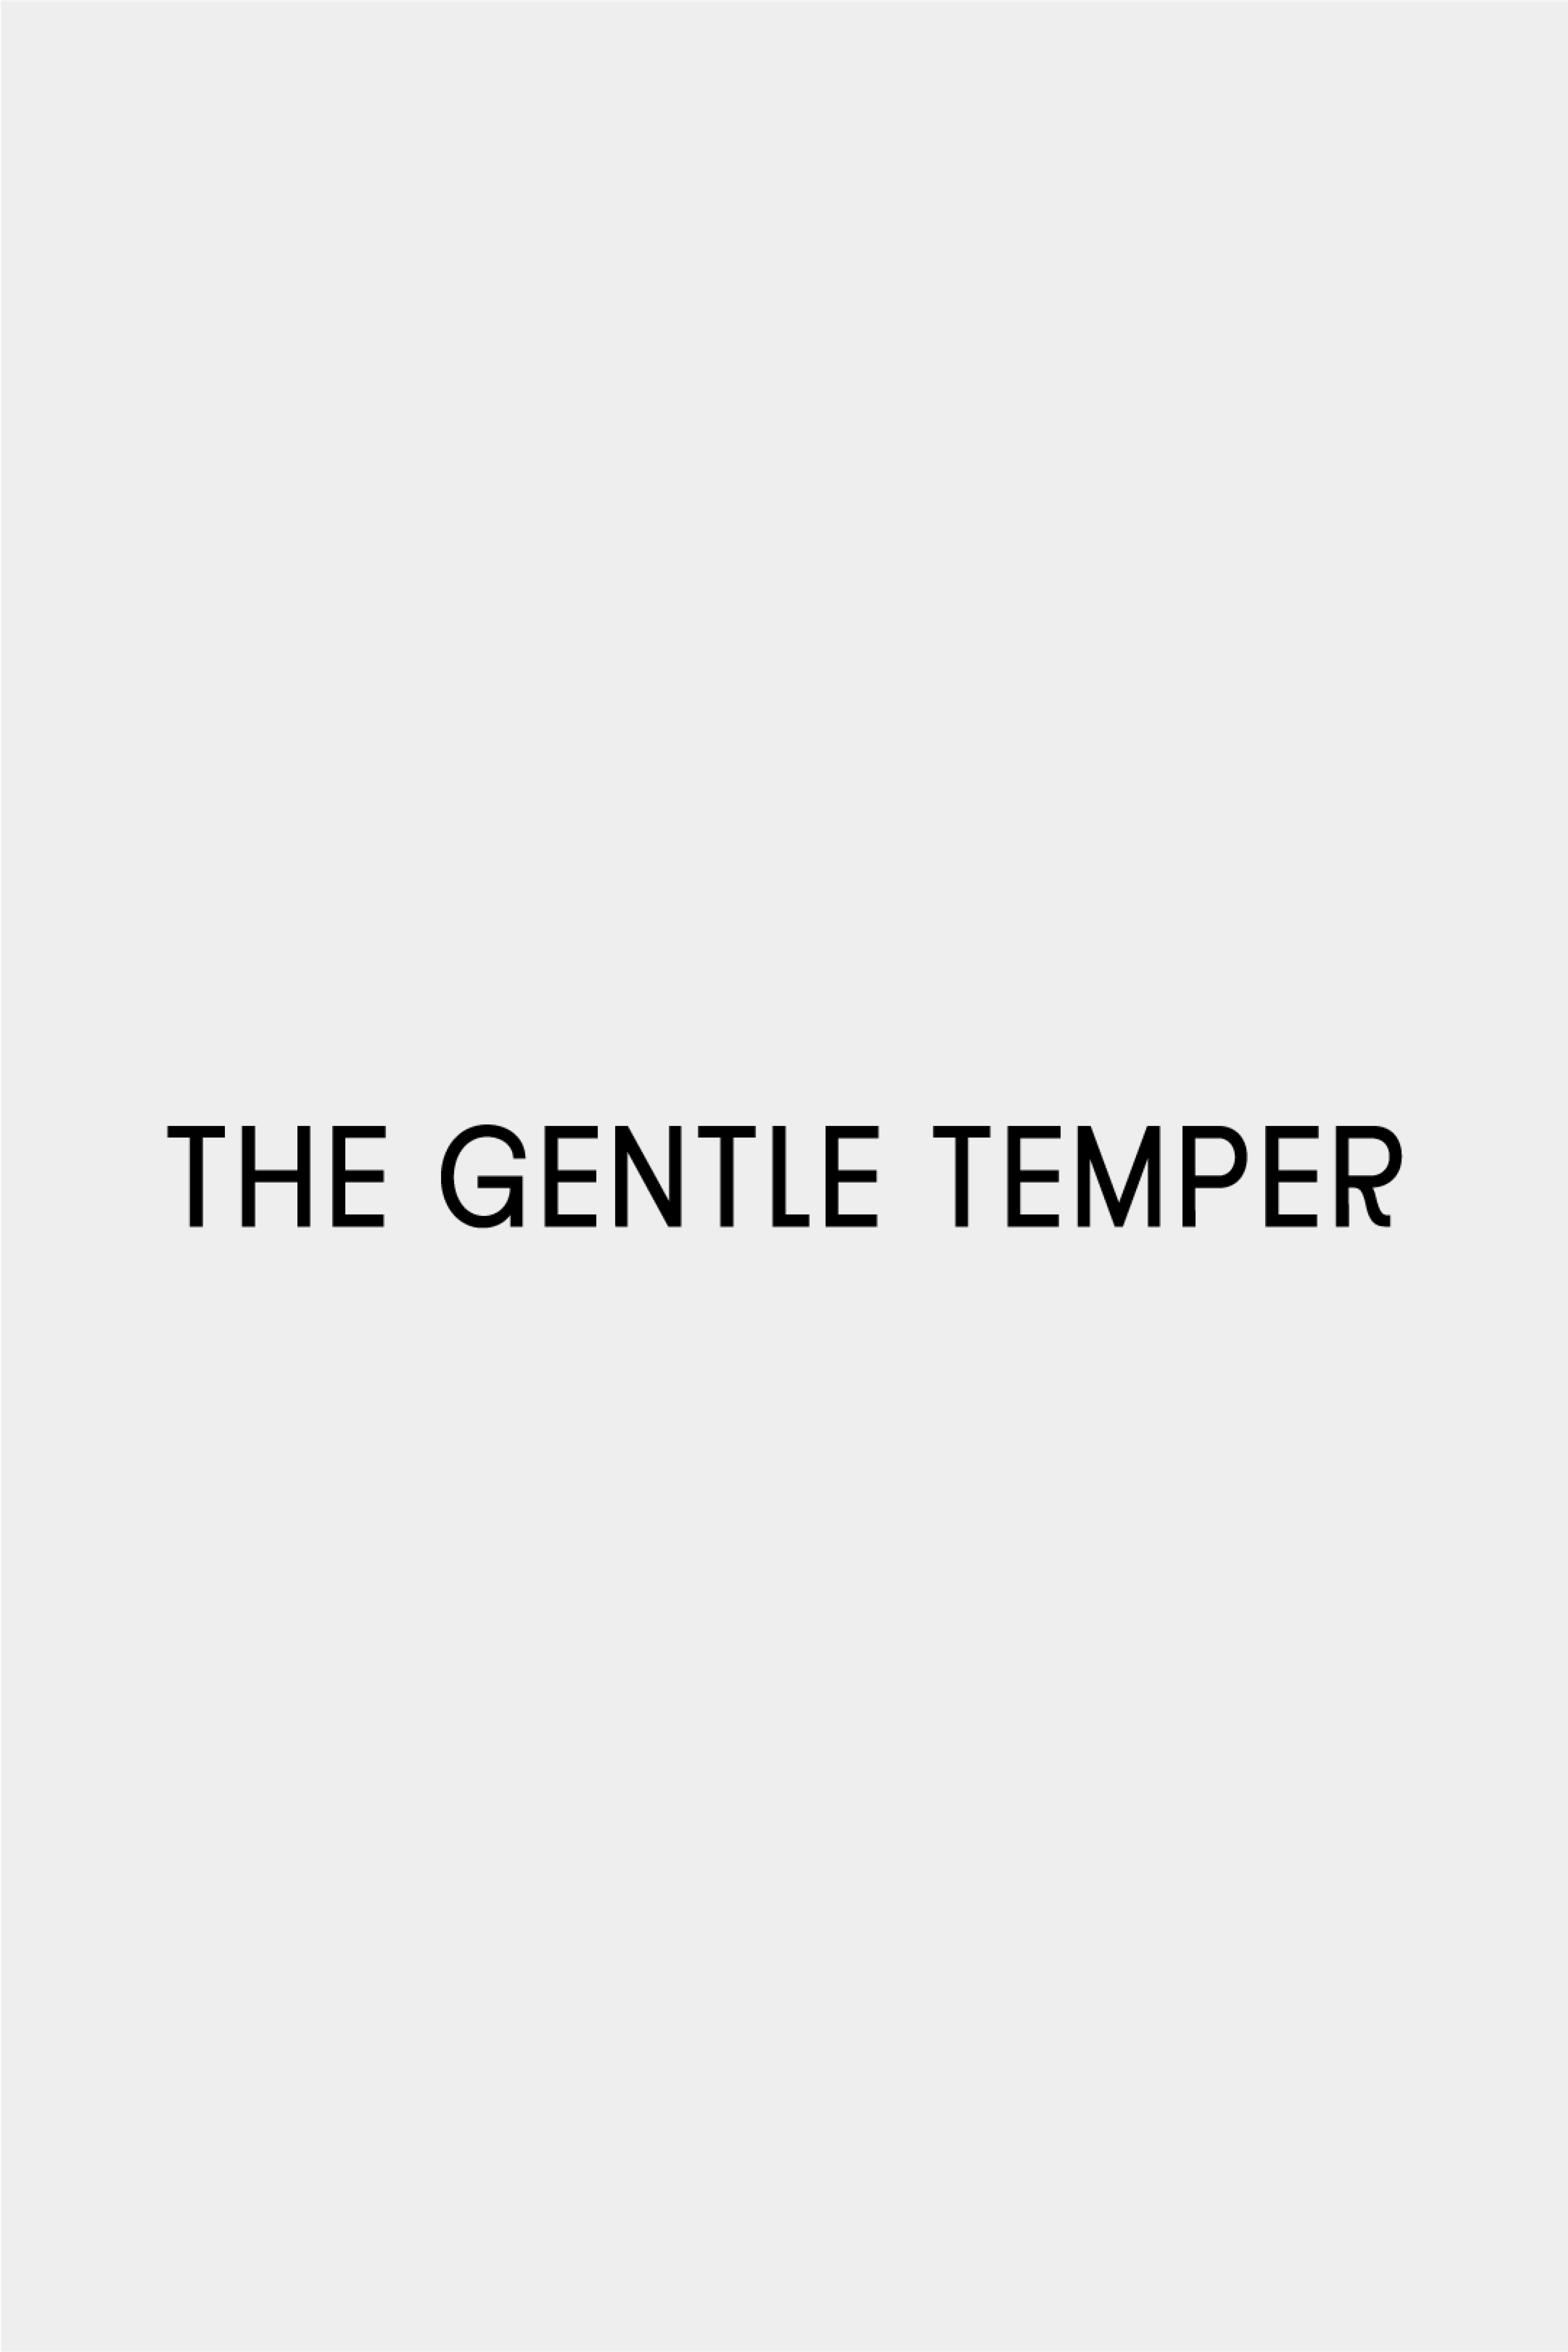 Black typographic logo of “The Gentle Temper” on a bright grey background